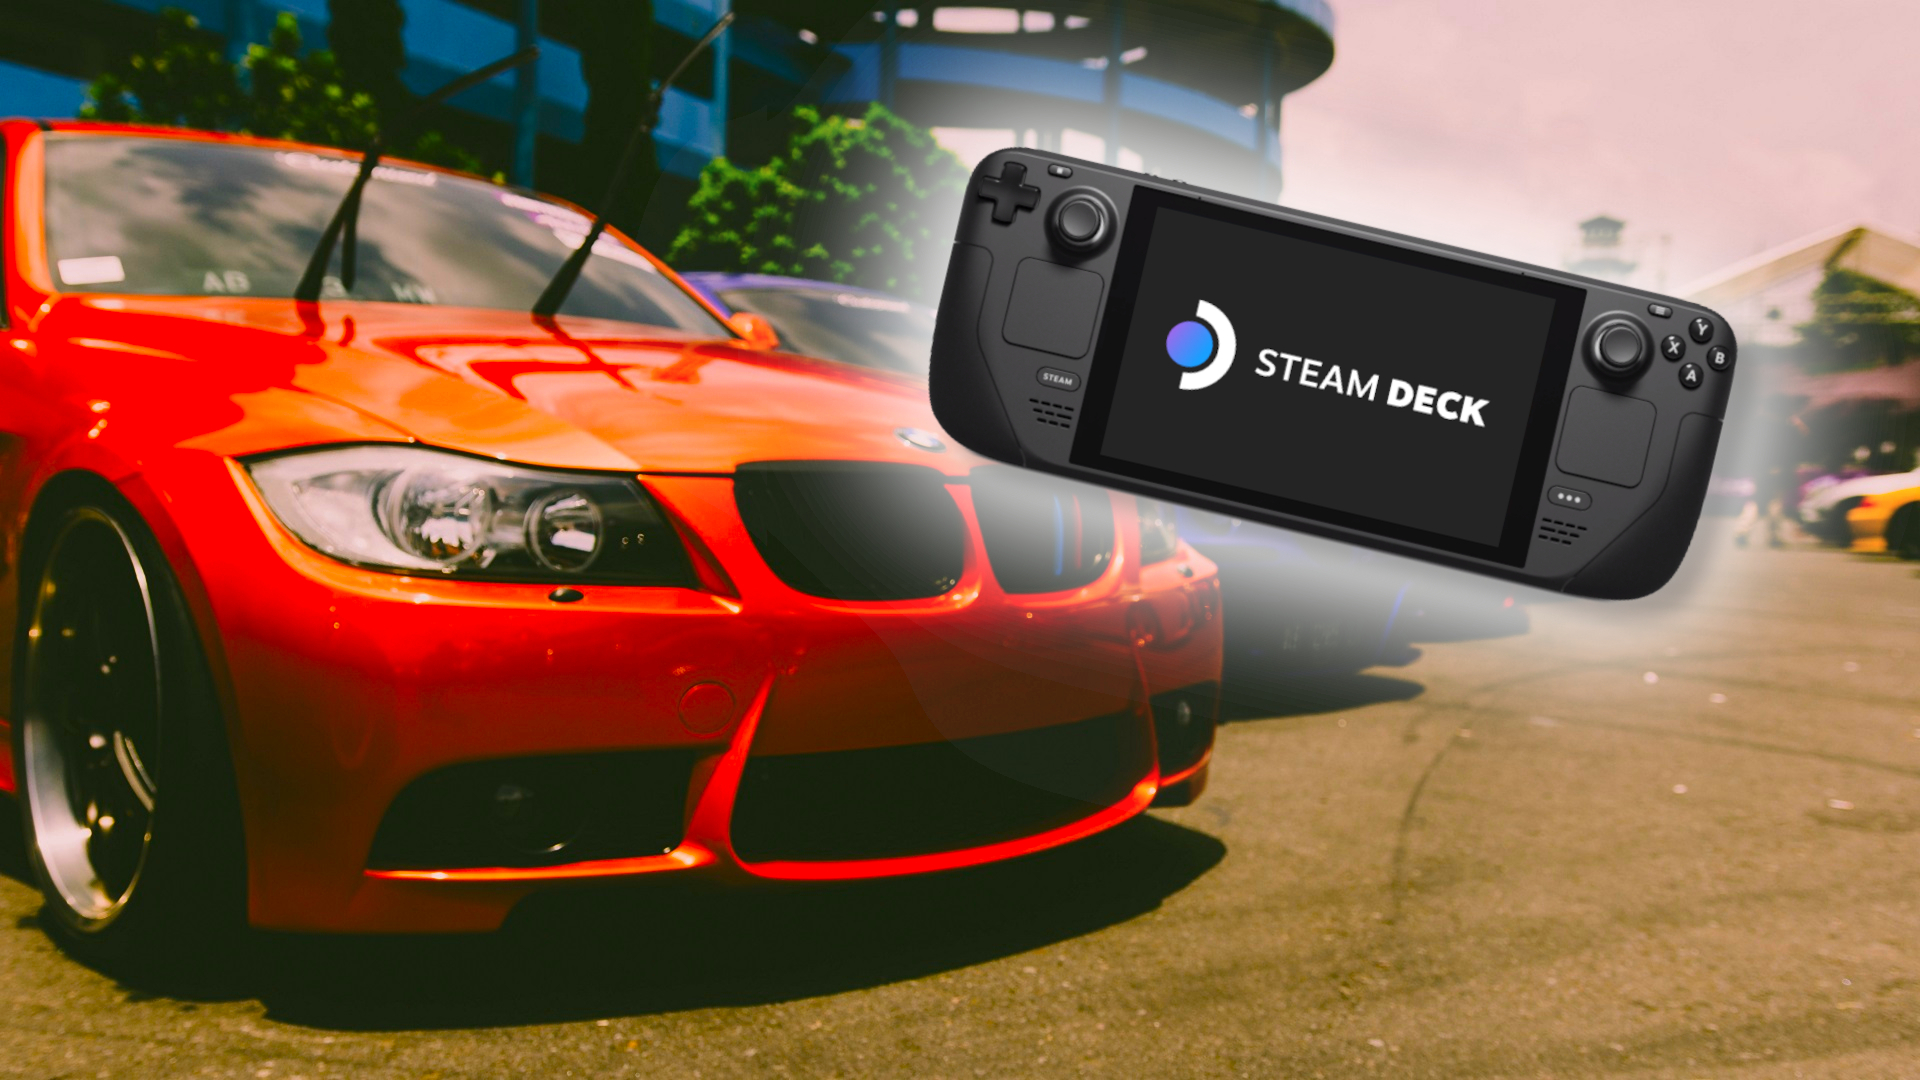 Turn your Steam Deck into a racing wheel with this accessory